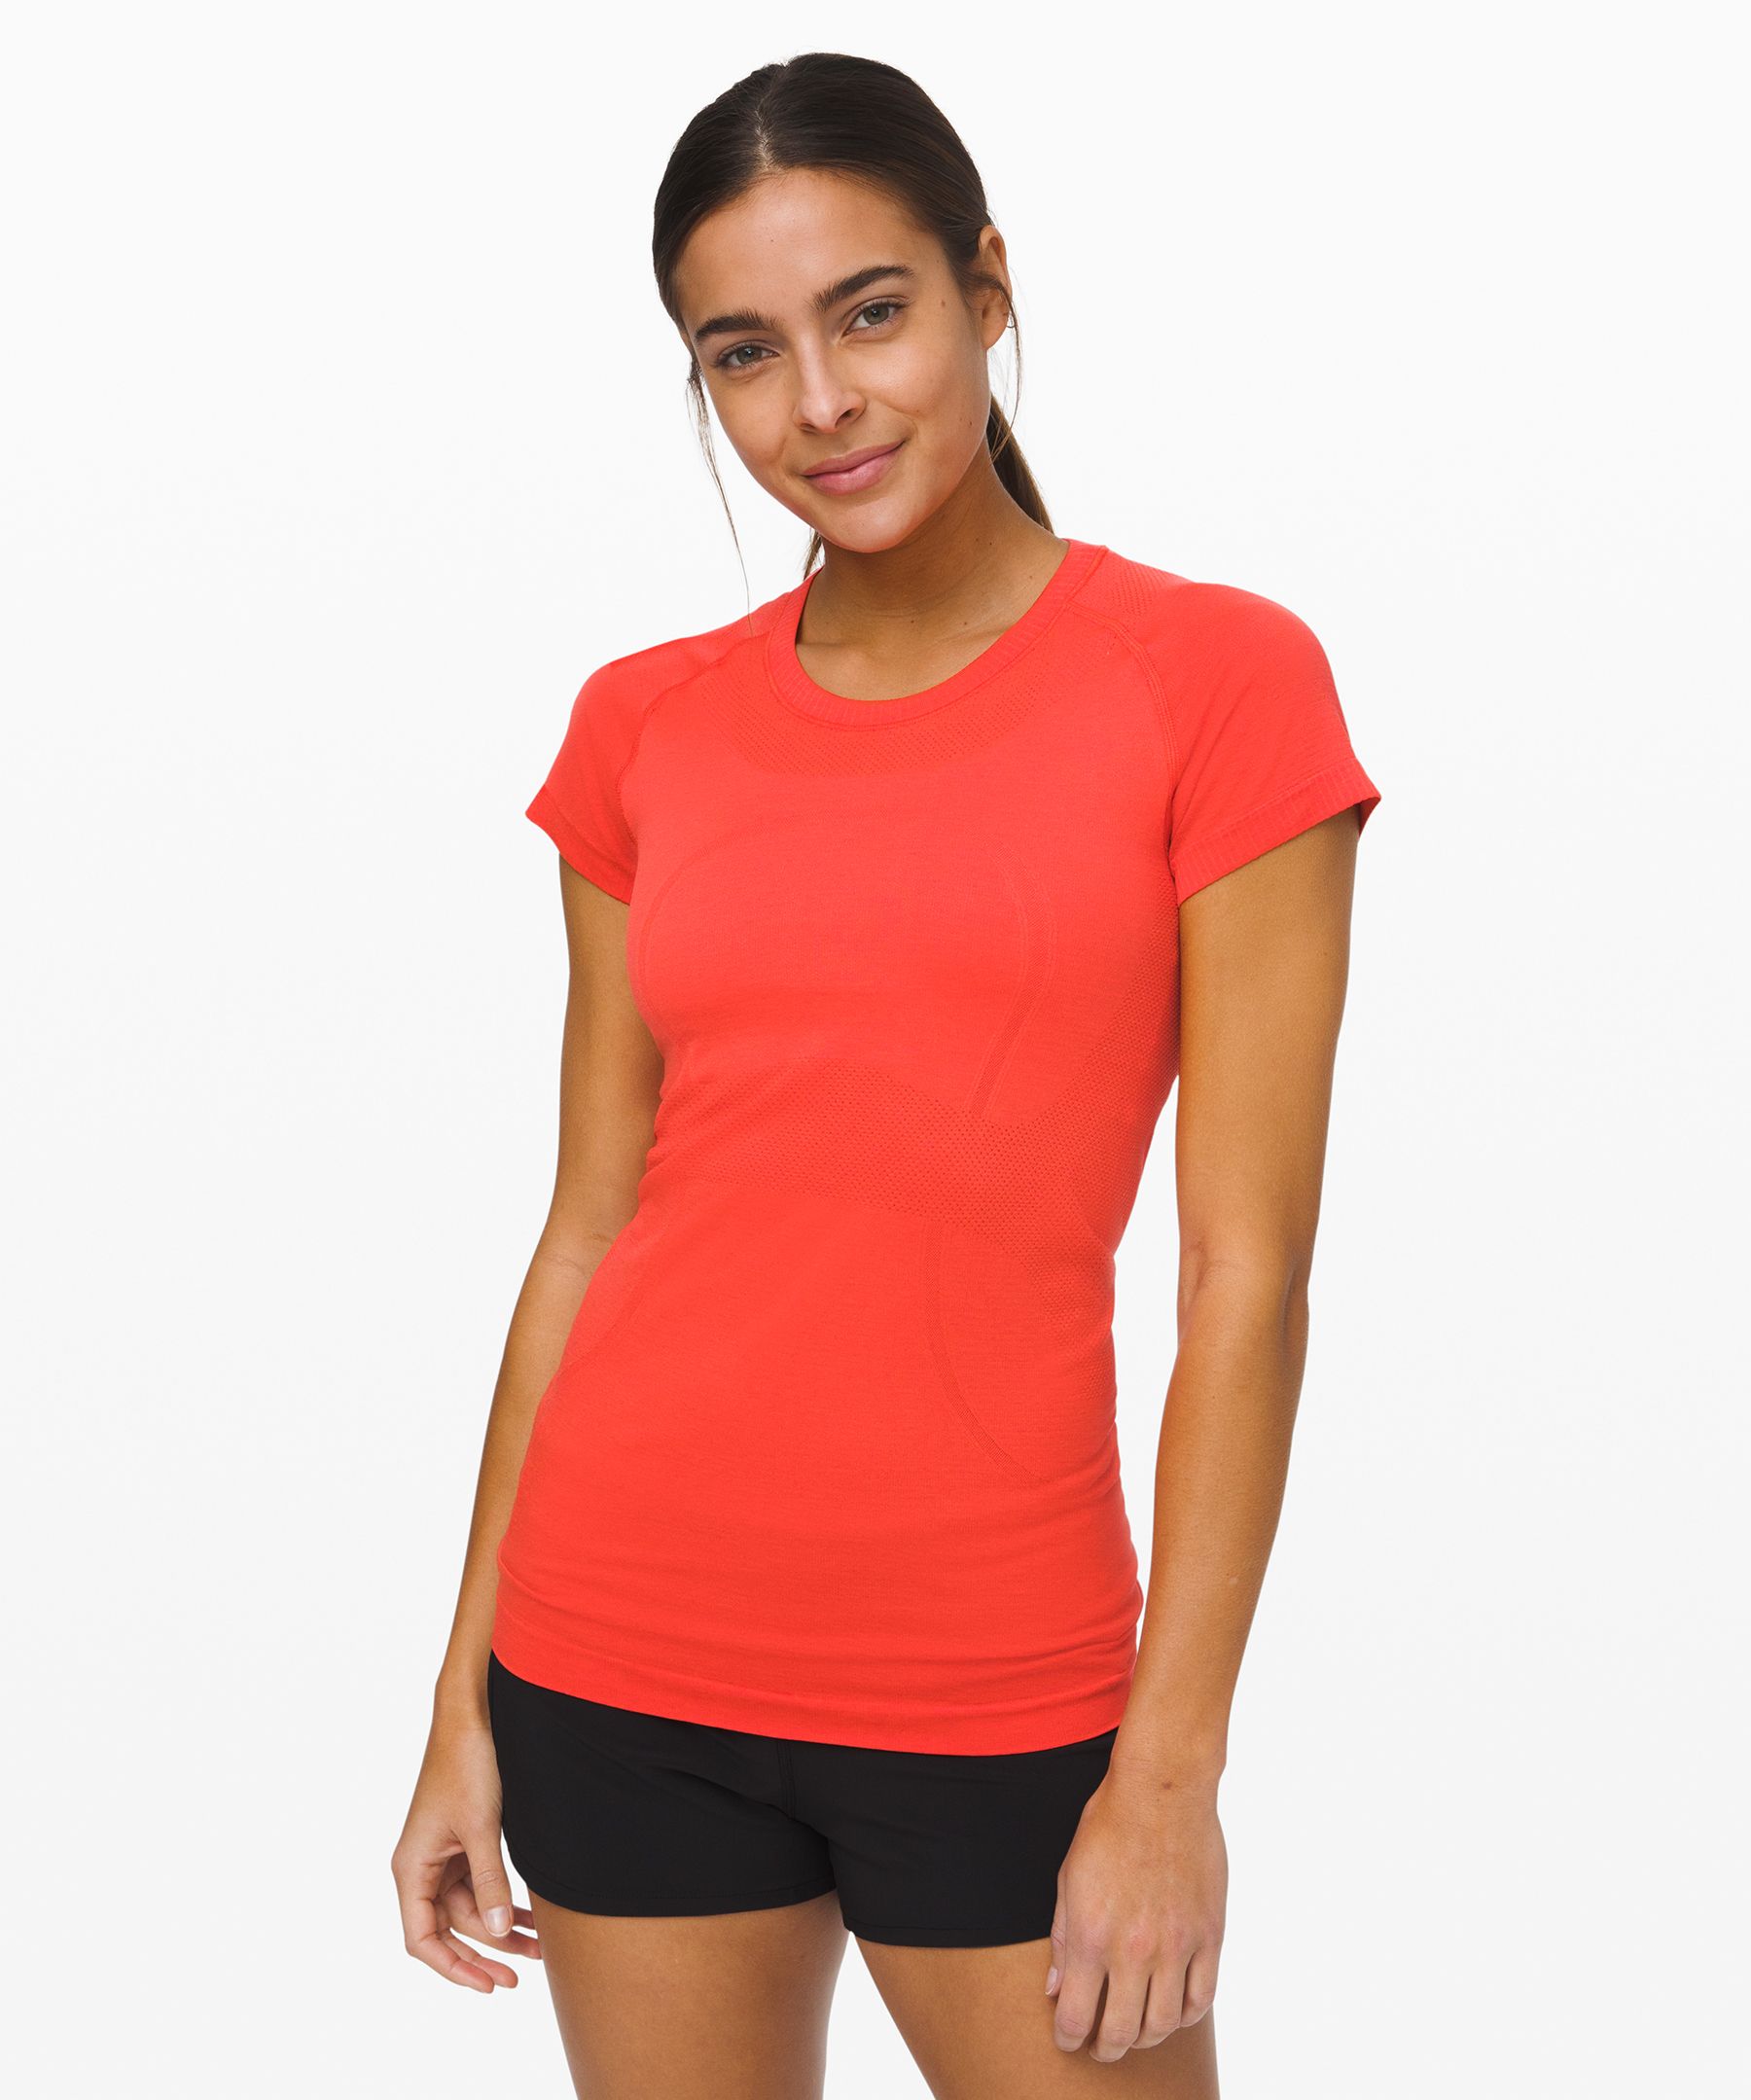 Lululemon Swiftly Tech Short Sleeve Crew In Thermal Red/thermal Red